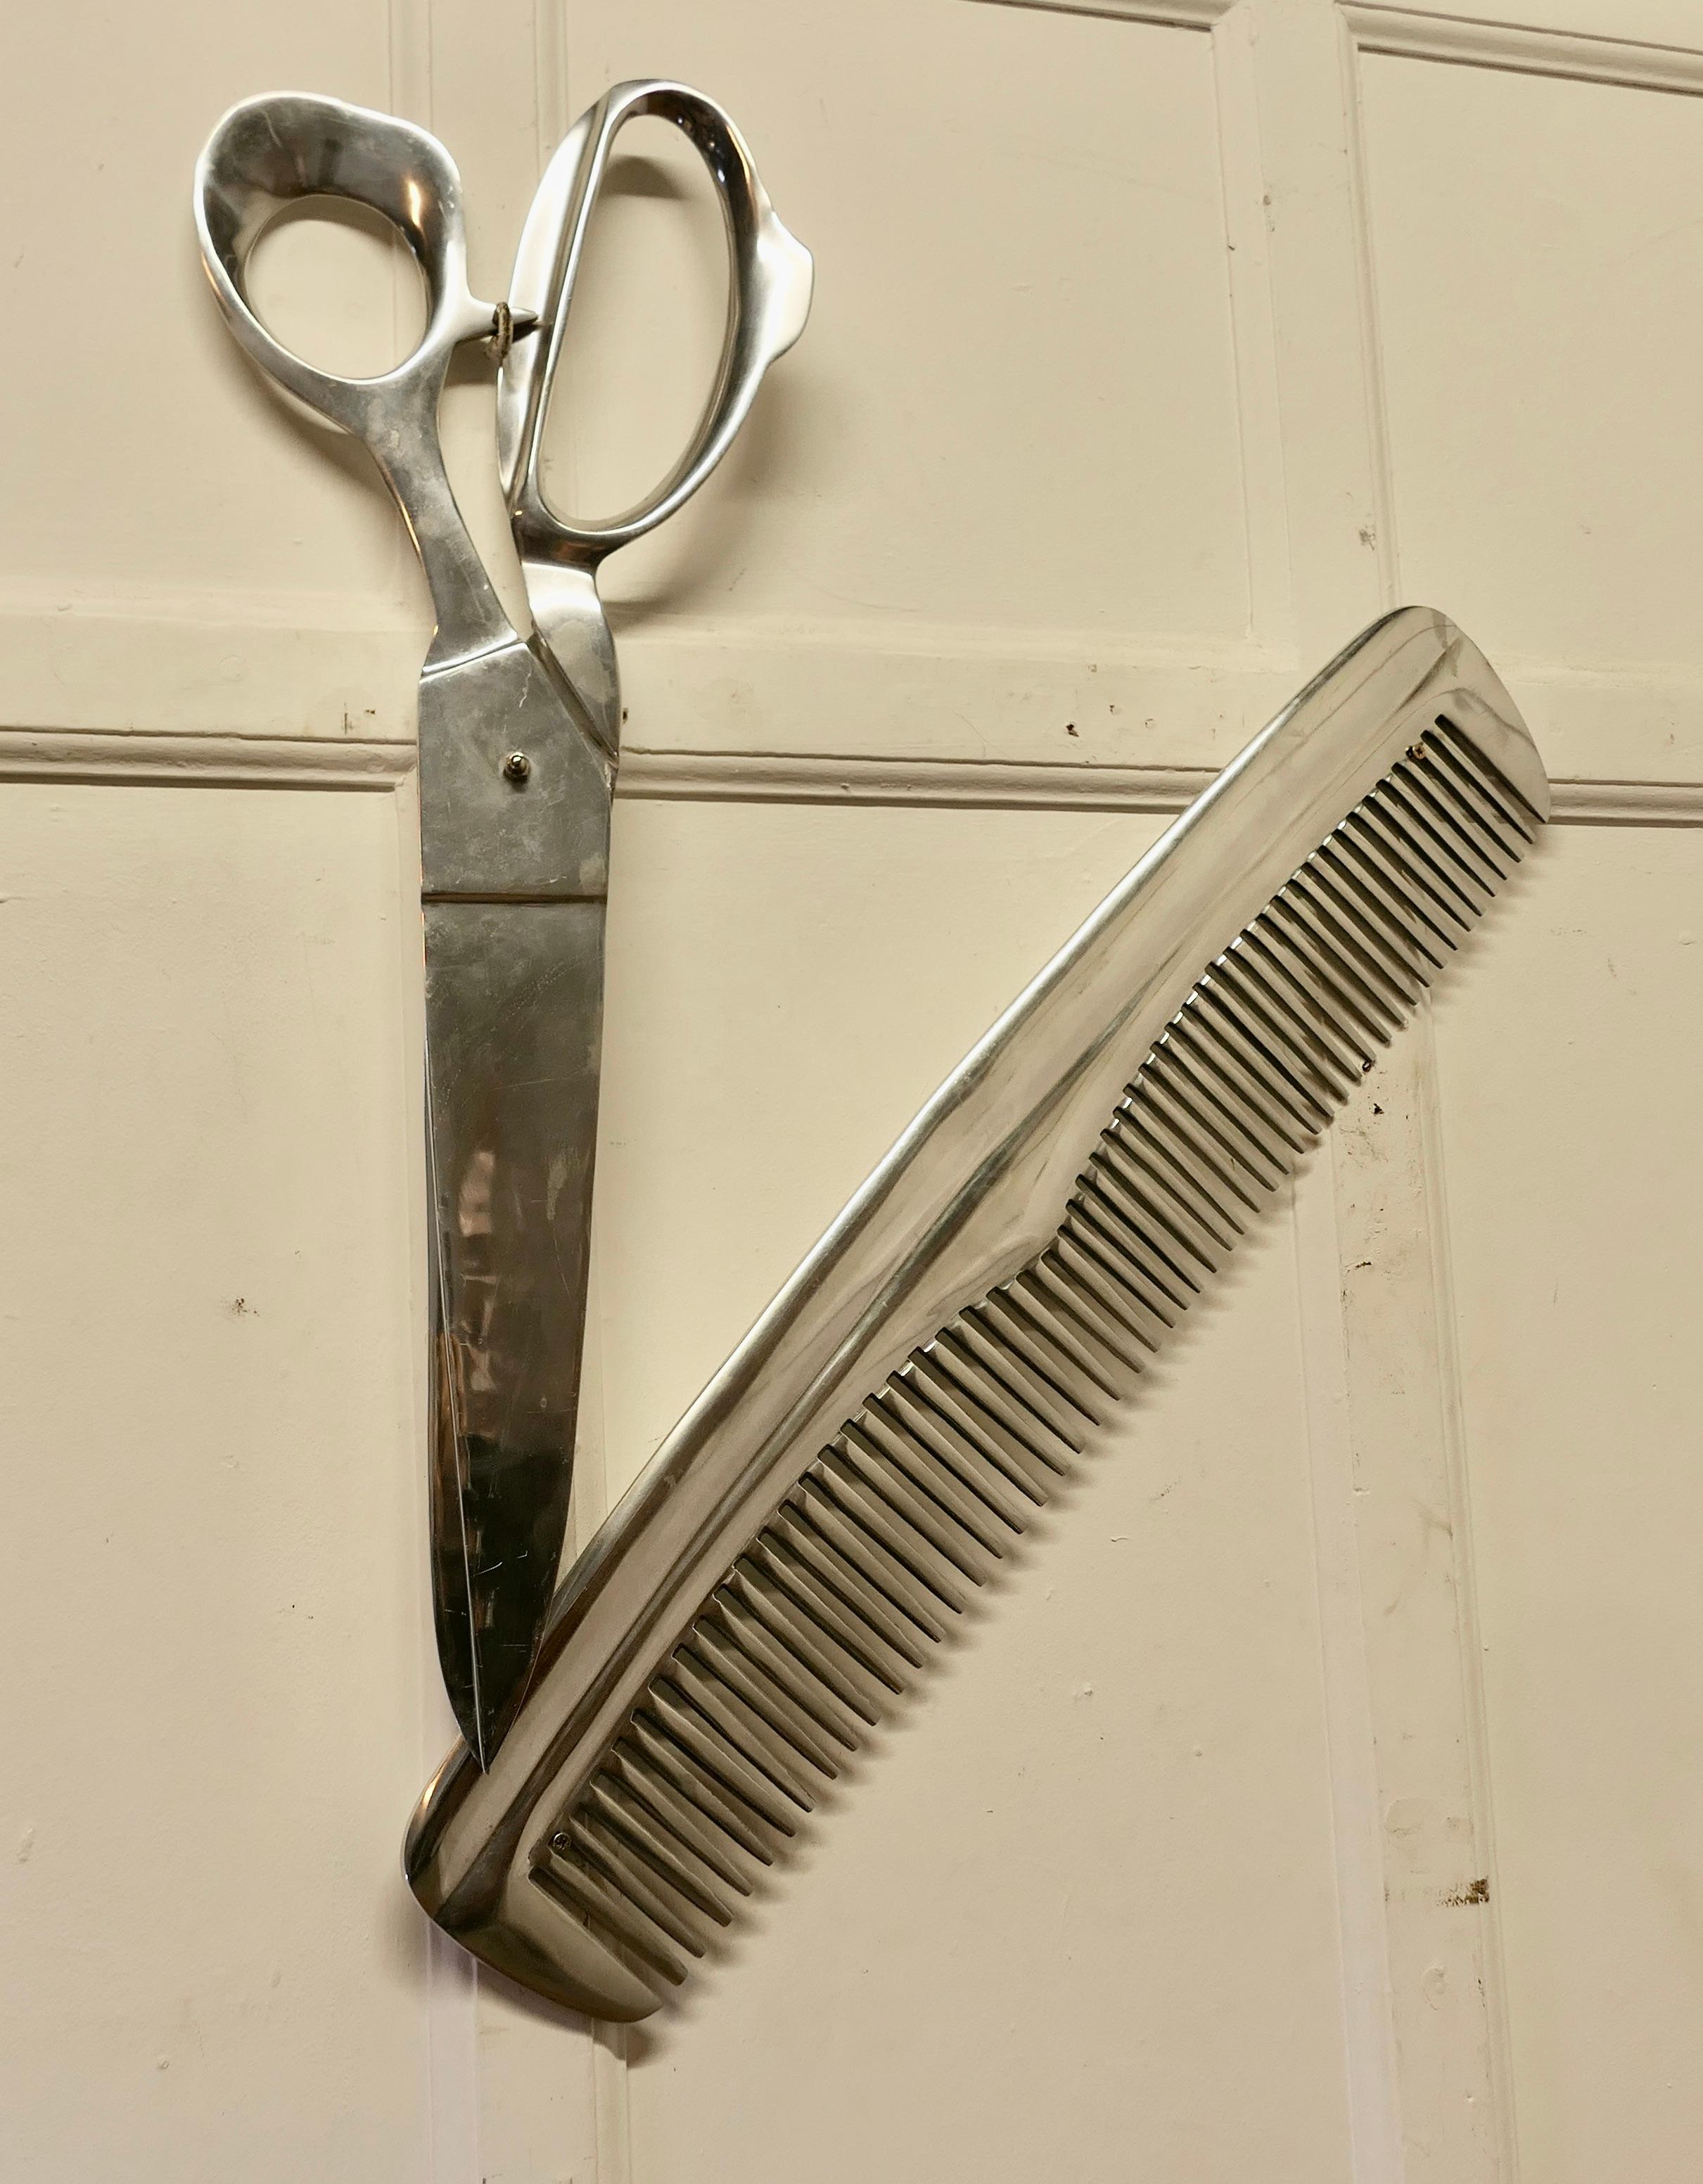 Barber Shop Trade Sign, Giant Comb and Scissors   Larger than life  For Sale 2